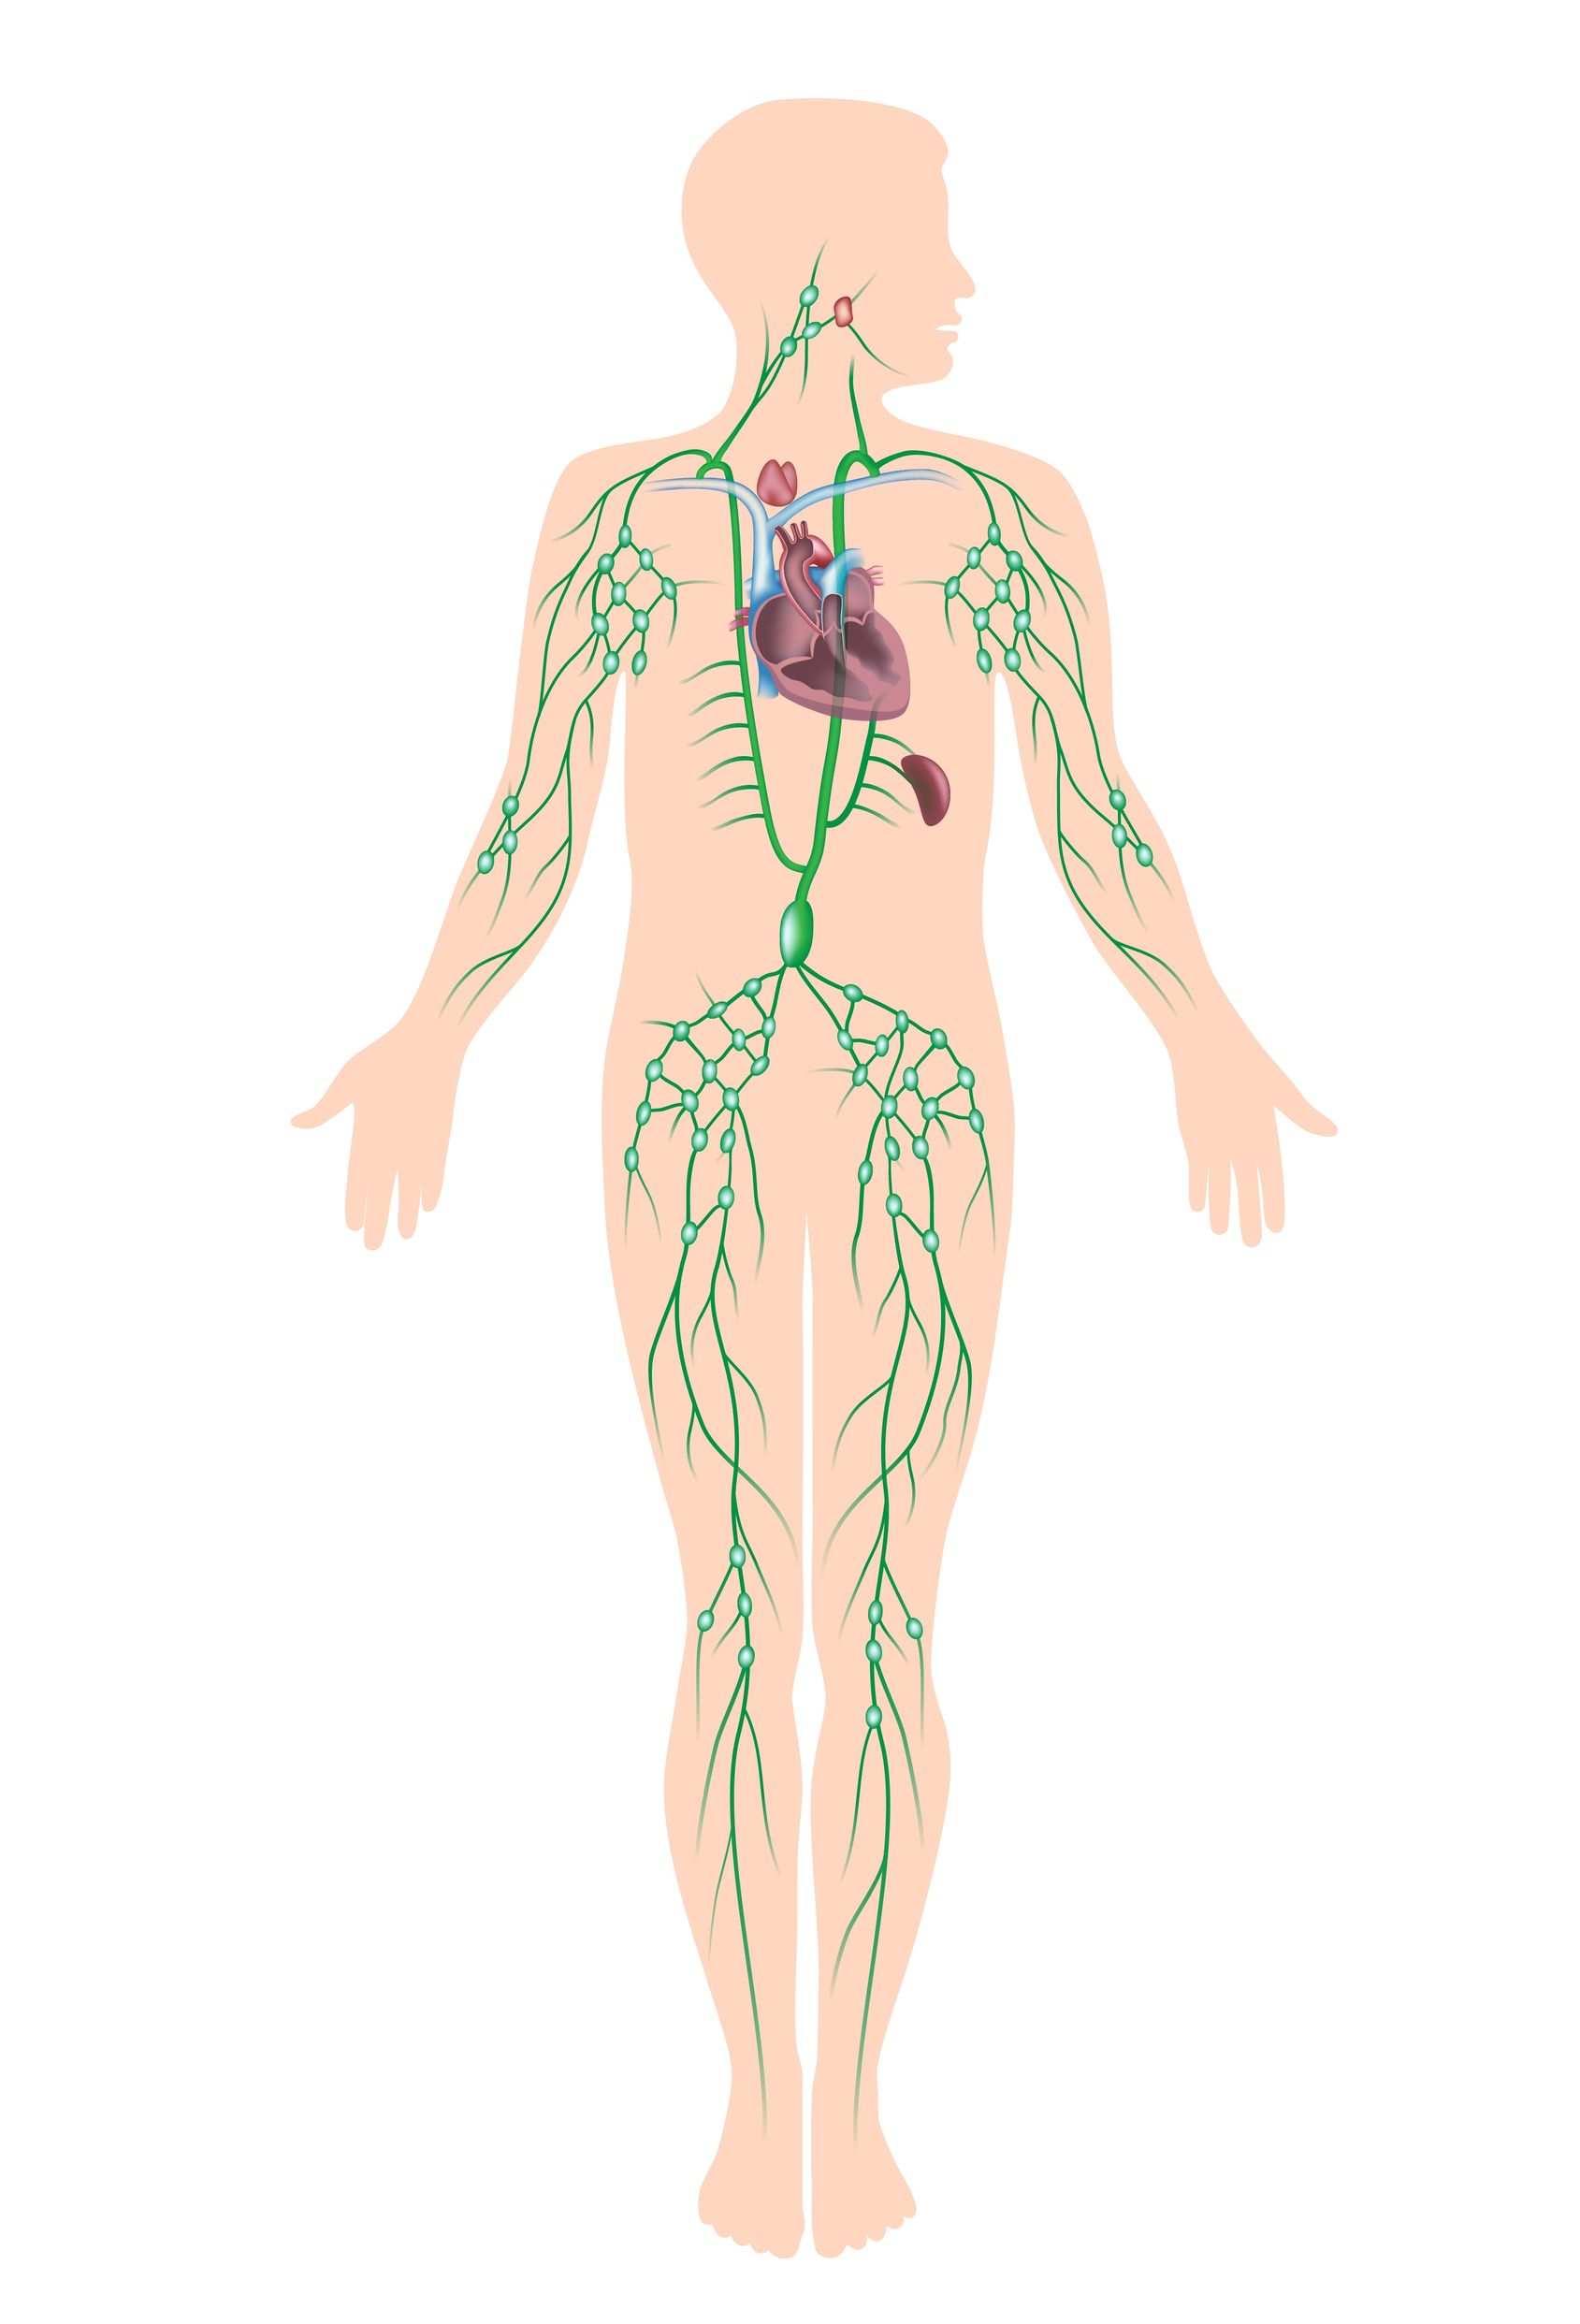 Signs and symptons of lymphatic congestion